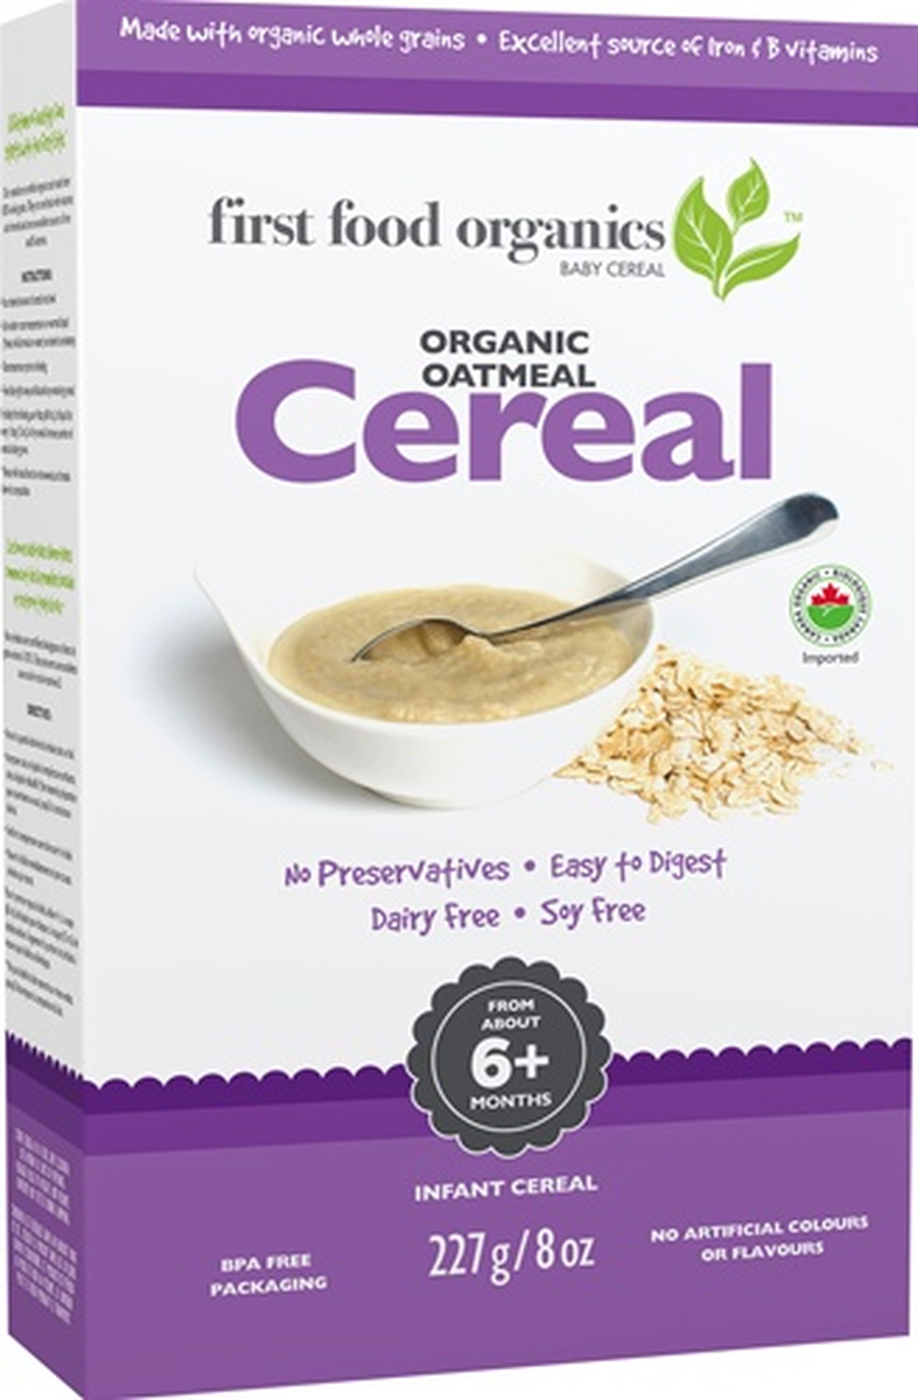 Baby Oatmeal Cereal (227g)